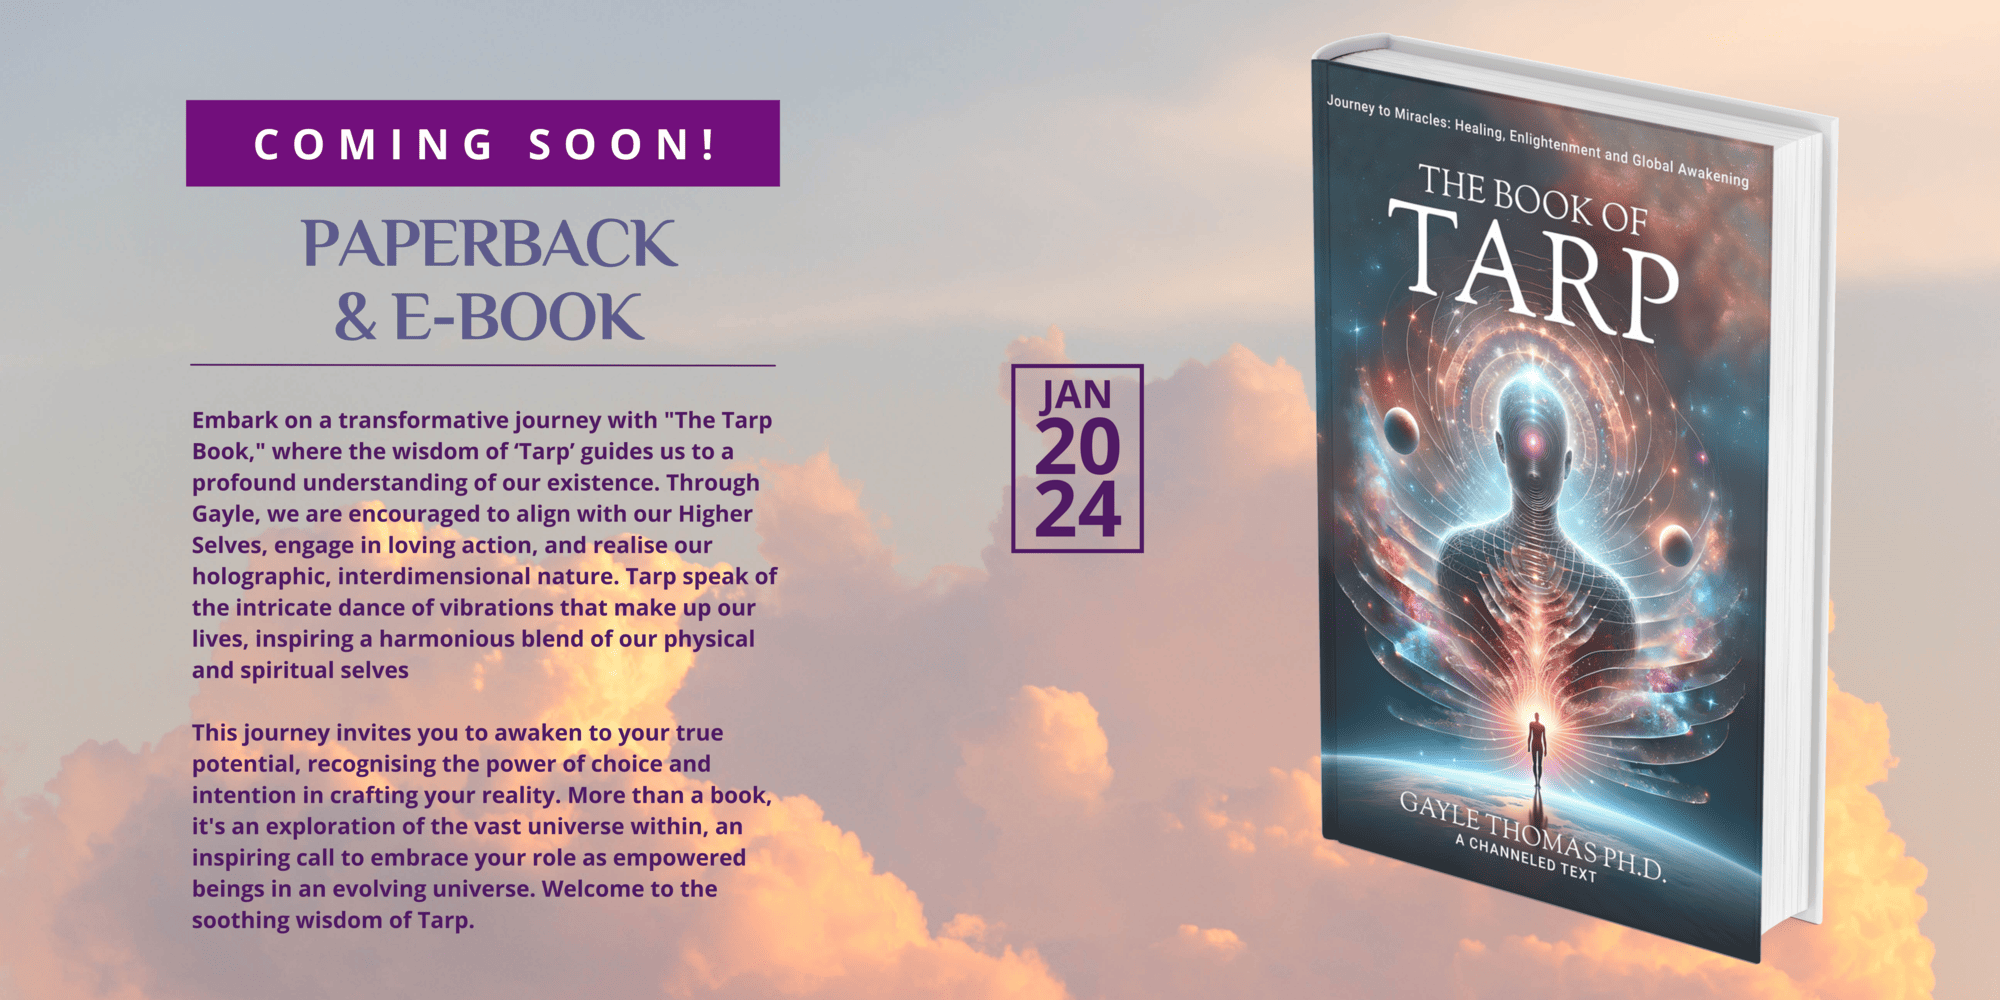 COMING SOON! The Book of Tarp - Journey to Miracles: Healing, Enlightenment & Global Awakening